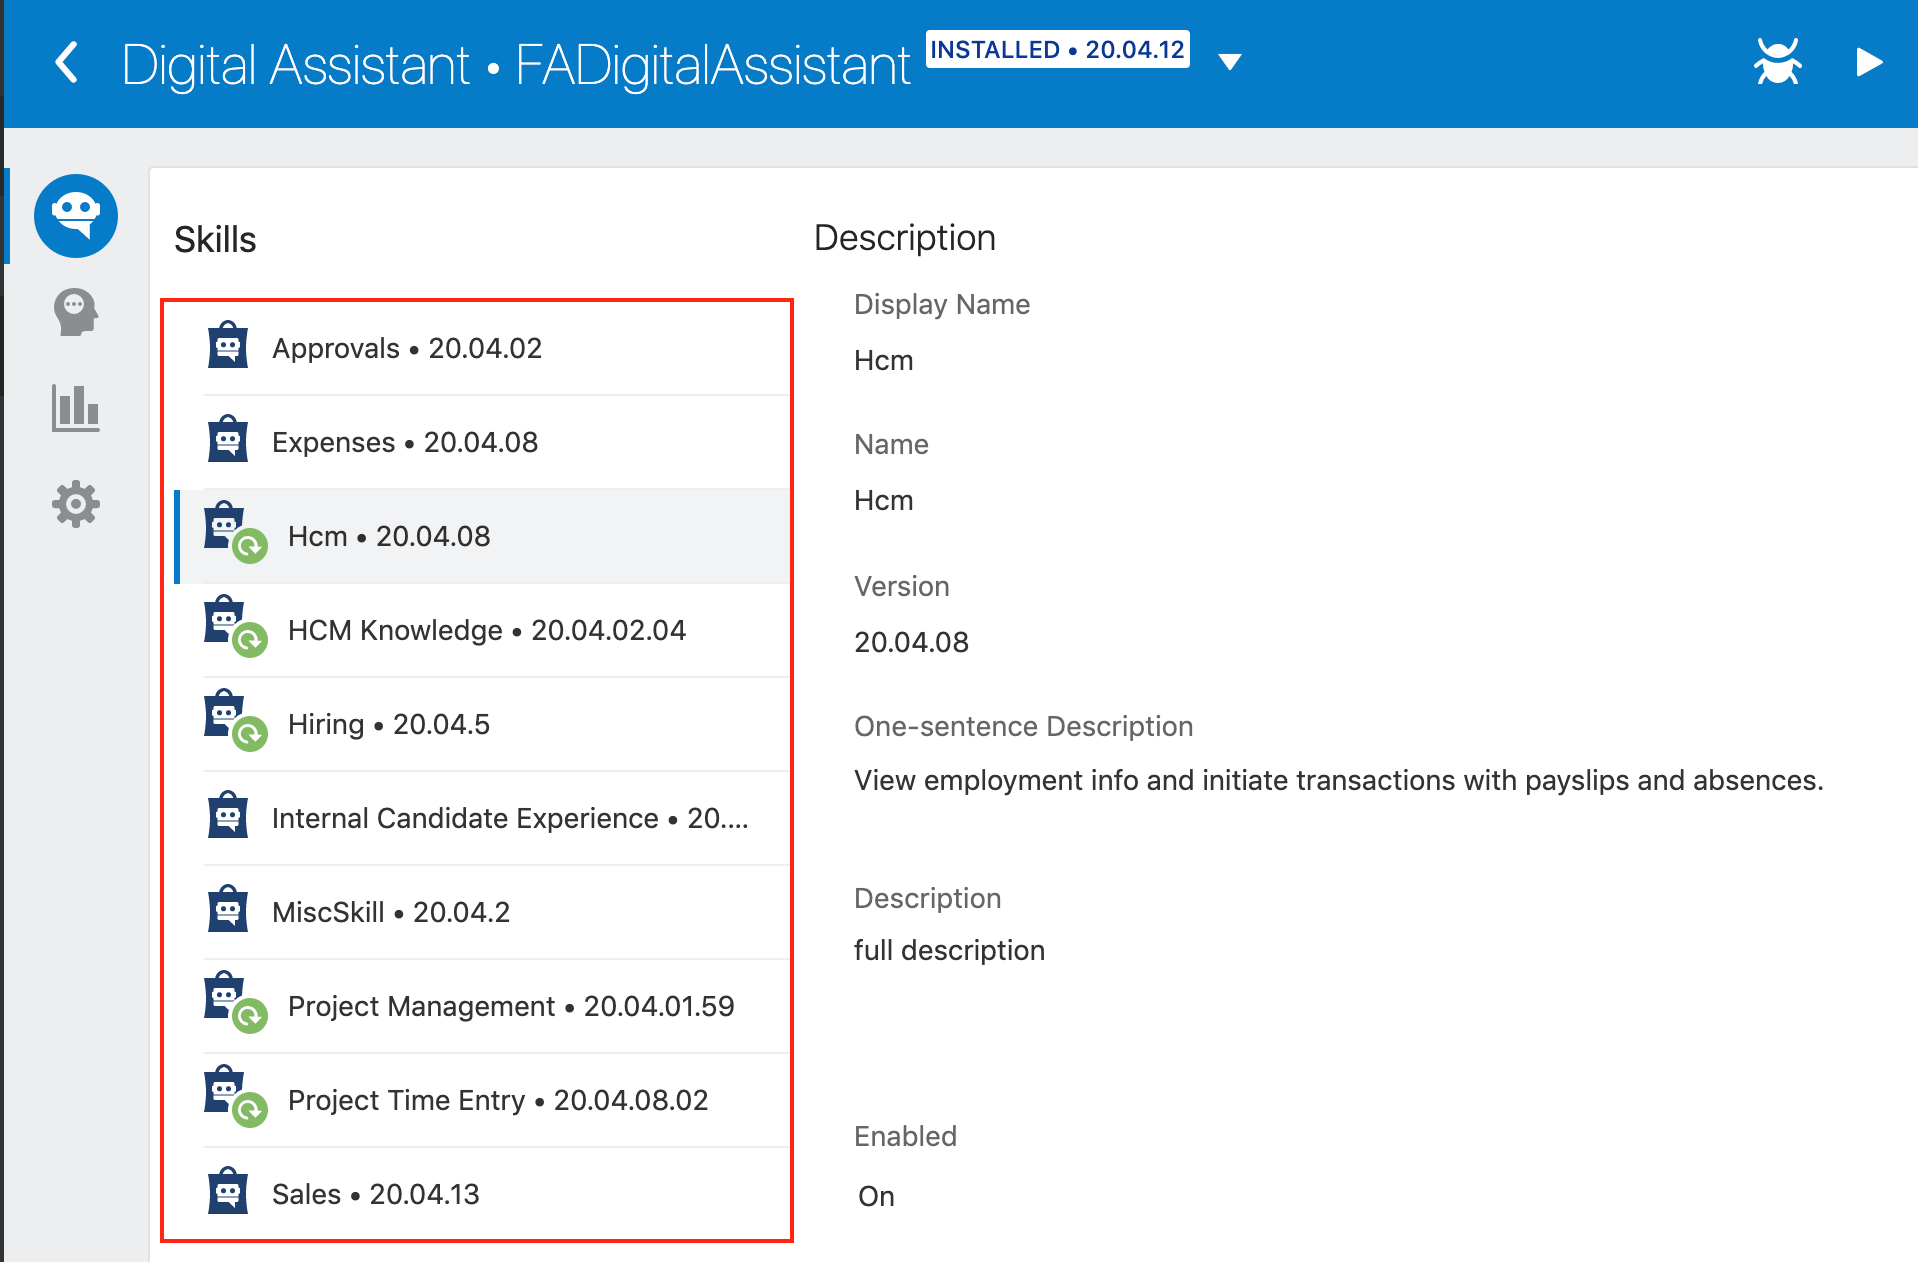 A screenshot of the Skills page for FADigitalAssistant, with a list of the skills that it contains, including Approvals, Expenses, Hcm, HCM Knowledge, and several others.